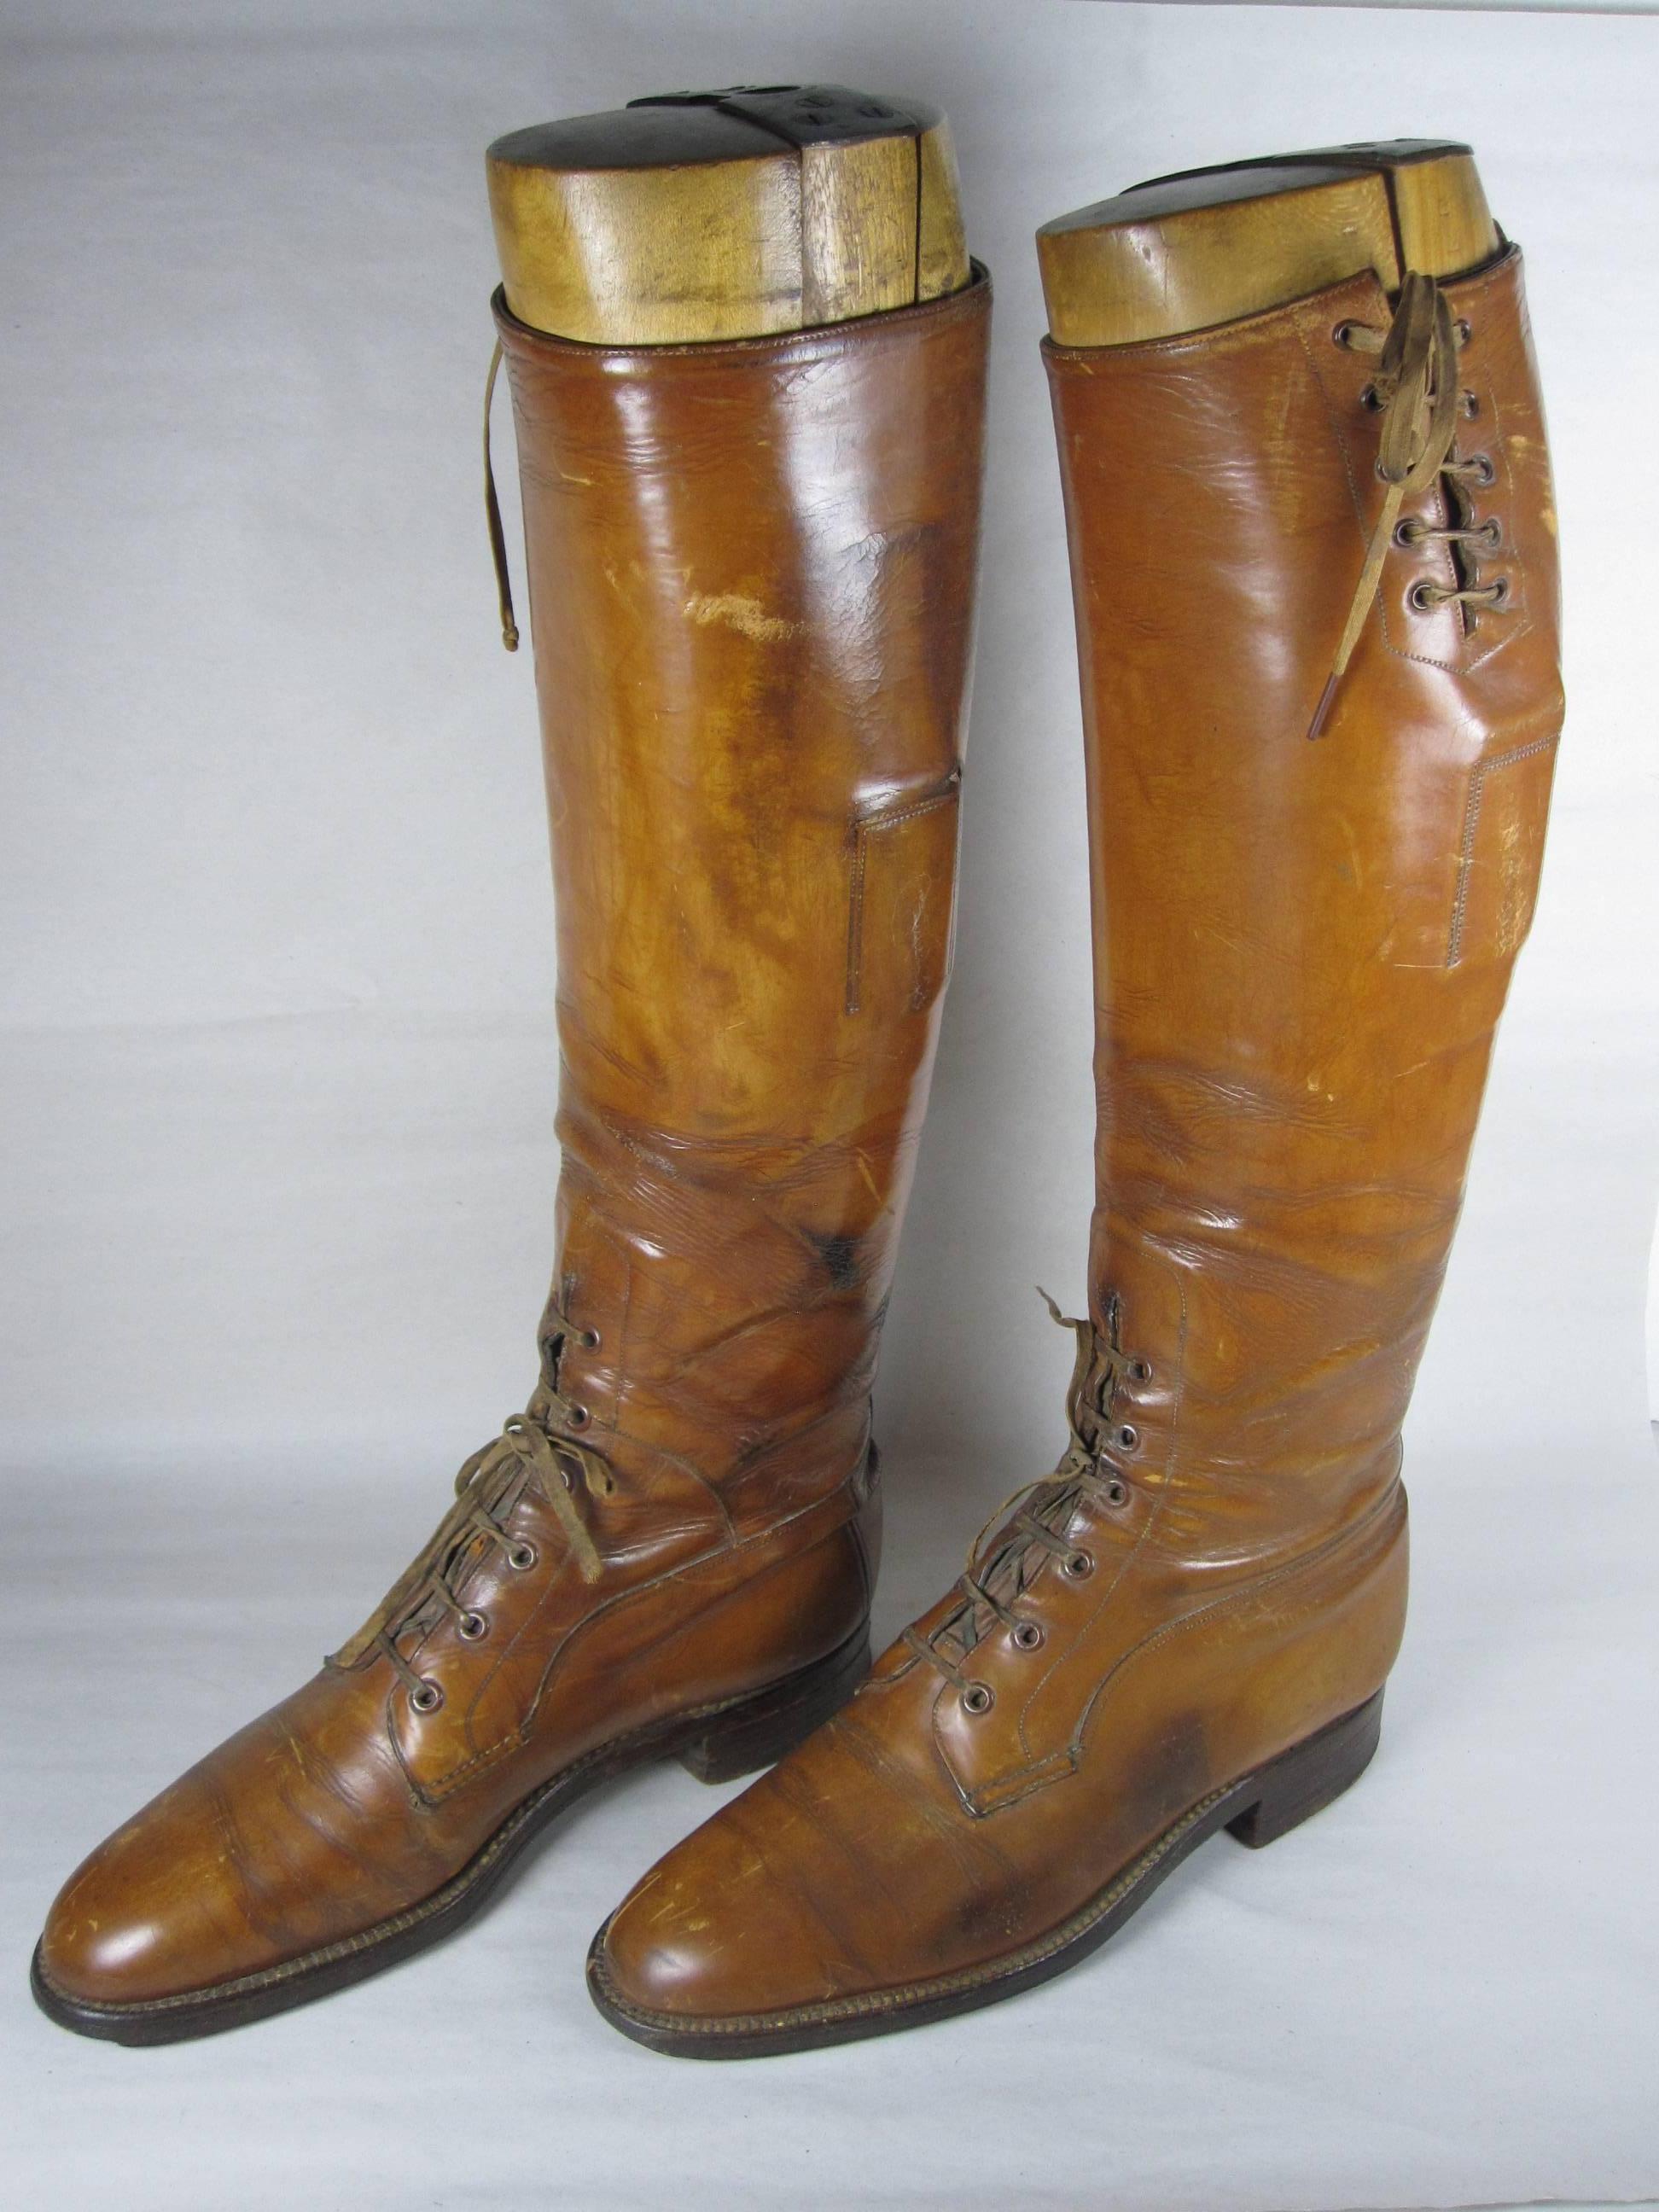 Leather Edwardian English Equestrian Riding Boots with Original Wooden Trees